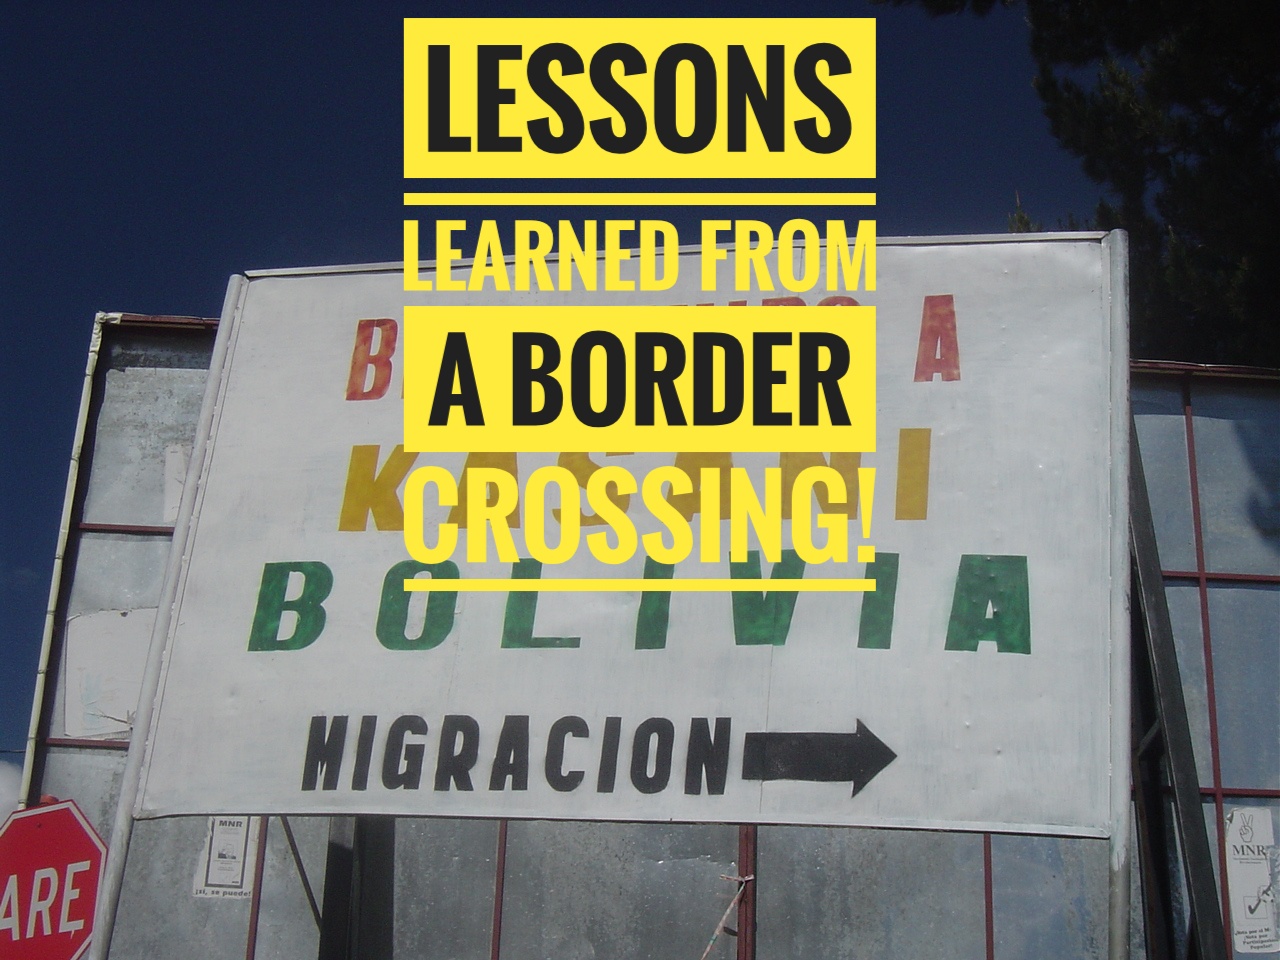 Lessons Learned From a Border Crossing!